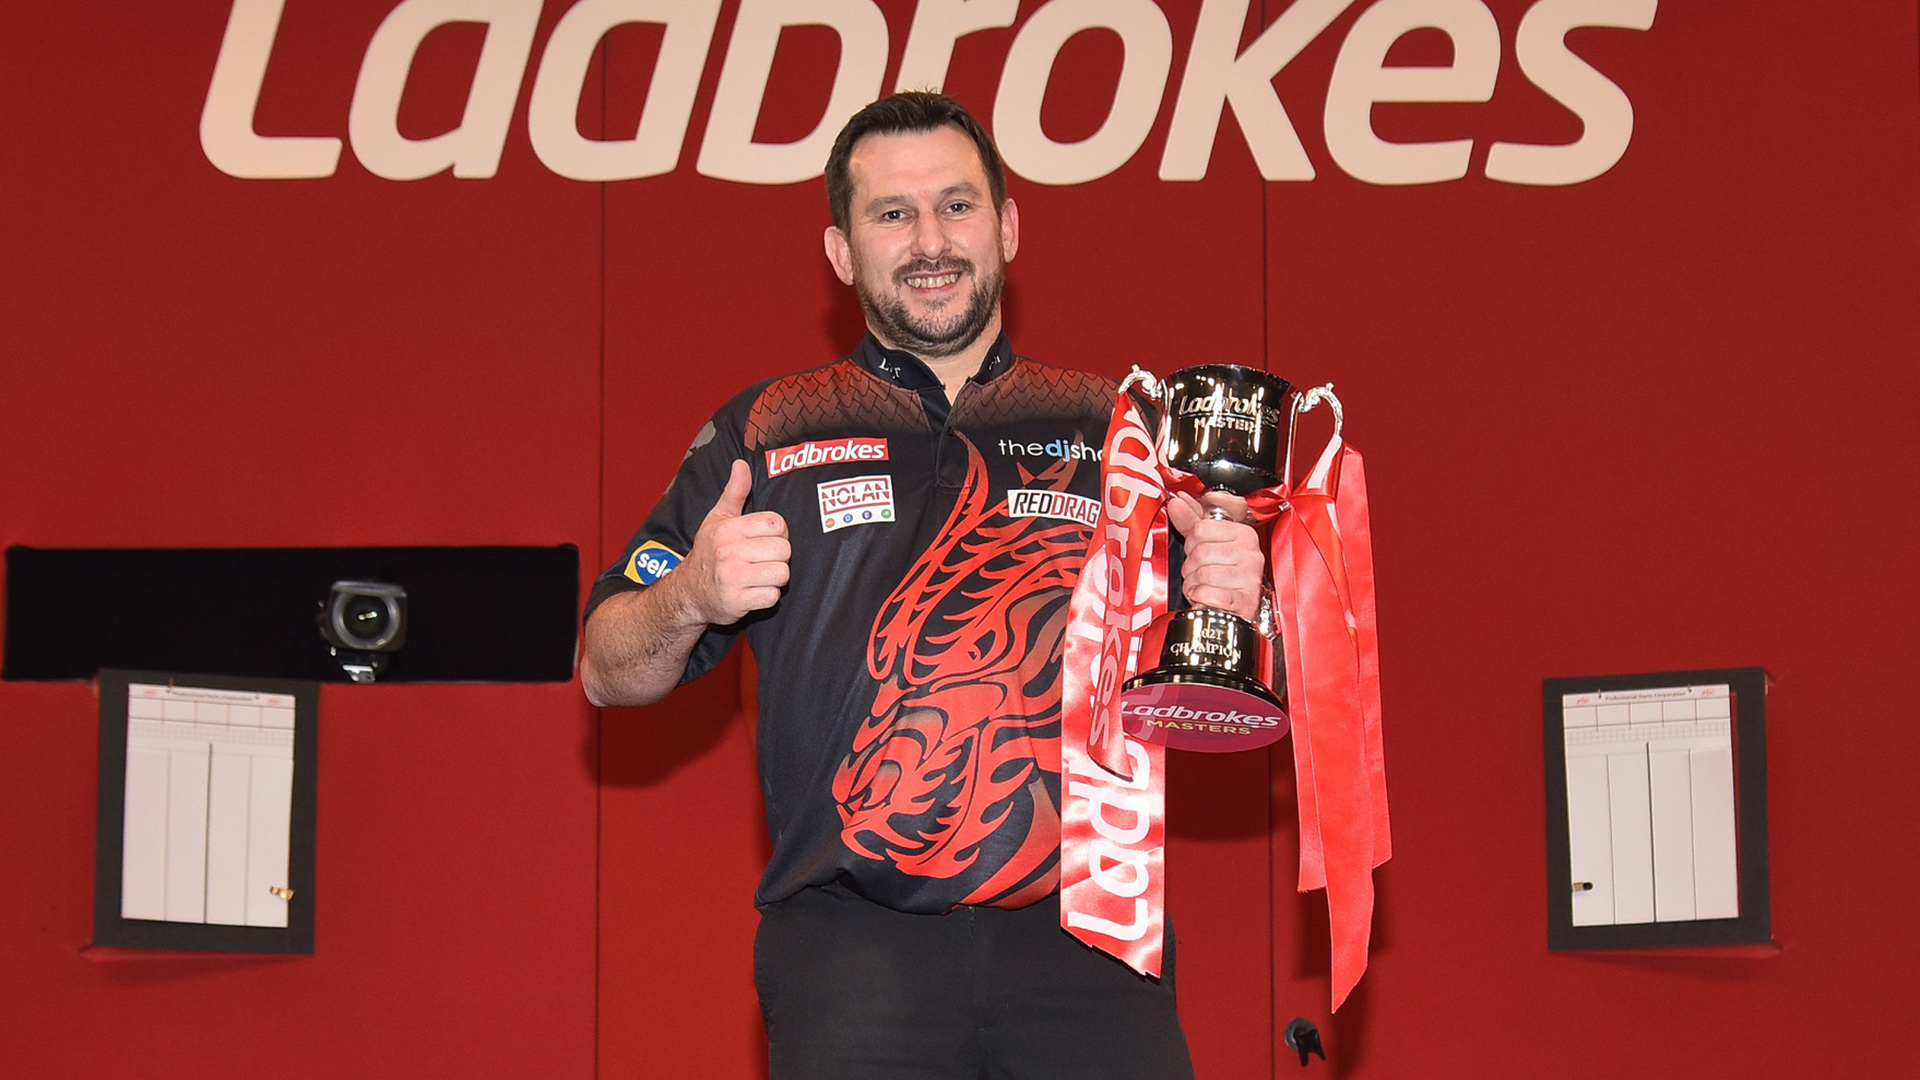 Masters darts 2021: Draw, schedule, odds, results & live TV coverage details